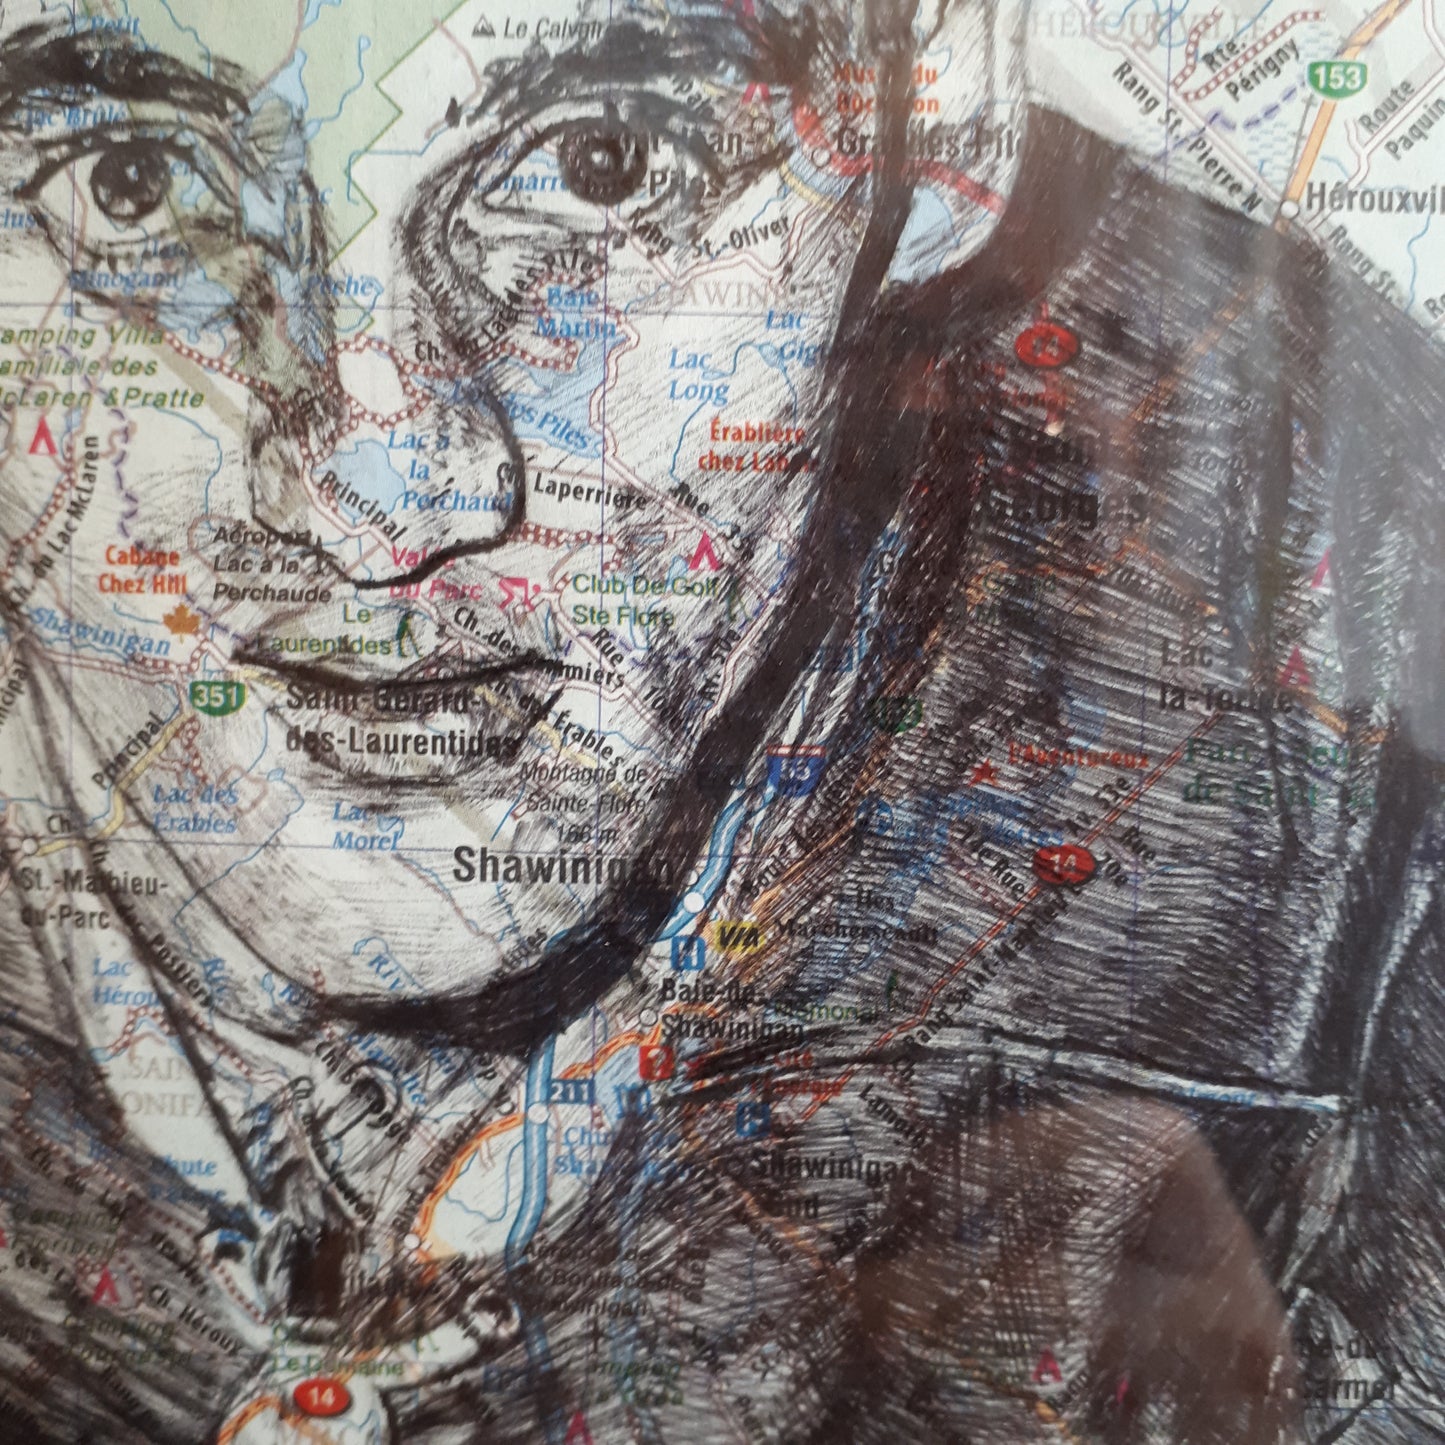 Original Pen and Ink Drawing on map - JACQUES PLANTE